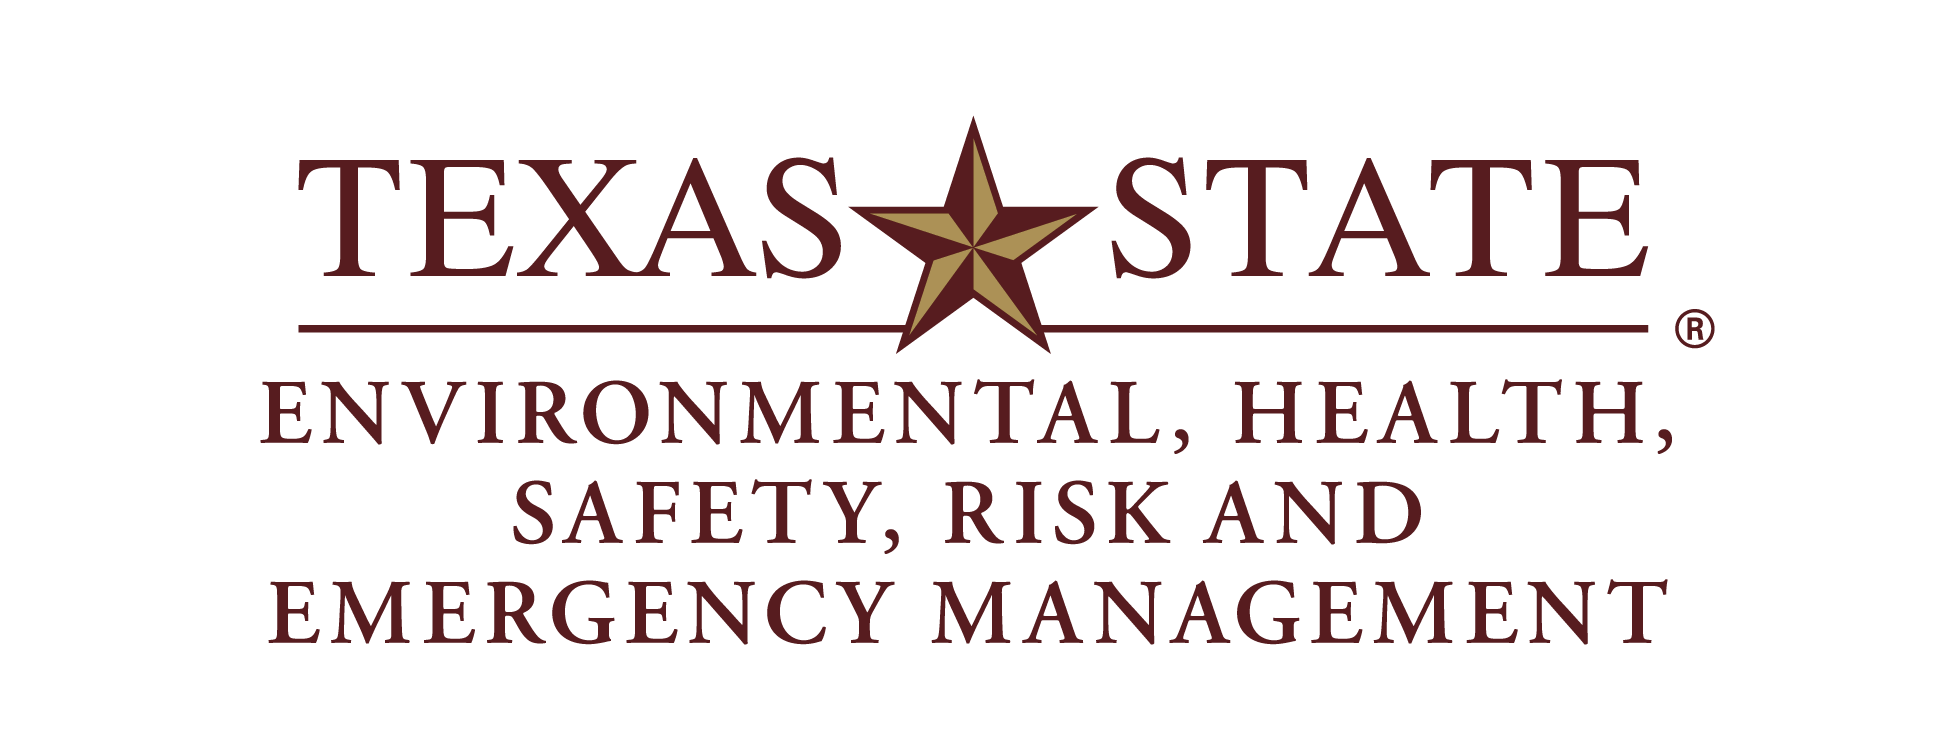 Environmental, Health, Safety, Risk, and Emergency Management Logo